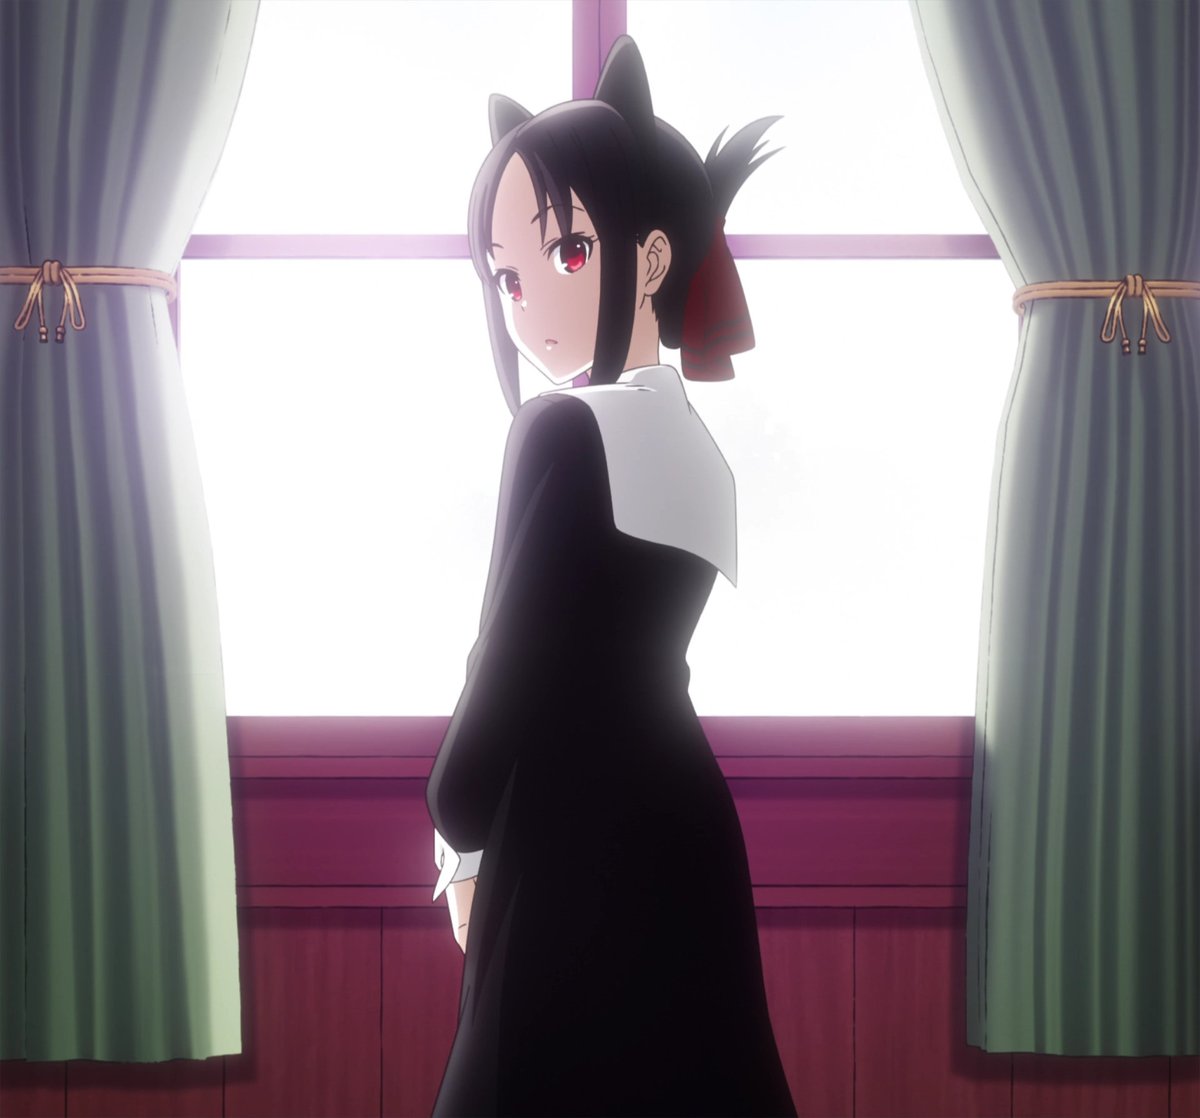 Kaguya Shinomiya- One moment she's cold, calculative, the next she's fuggin' baby. I normally shy away from girls with yandere tendencies, but her other traits outshine that and help her transcend into a personal favorite of mine.(Also, she pretty tsun tsun and me like that.)